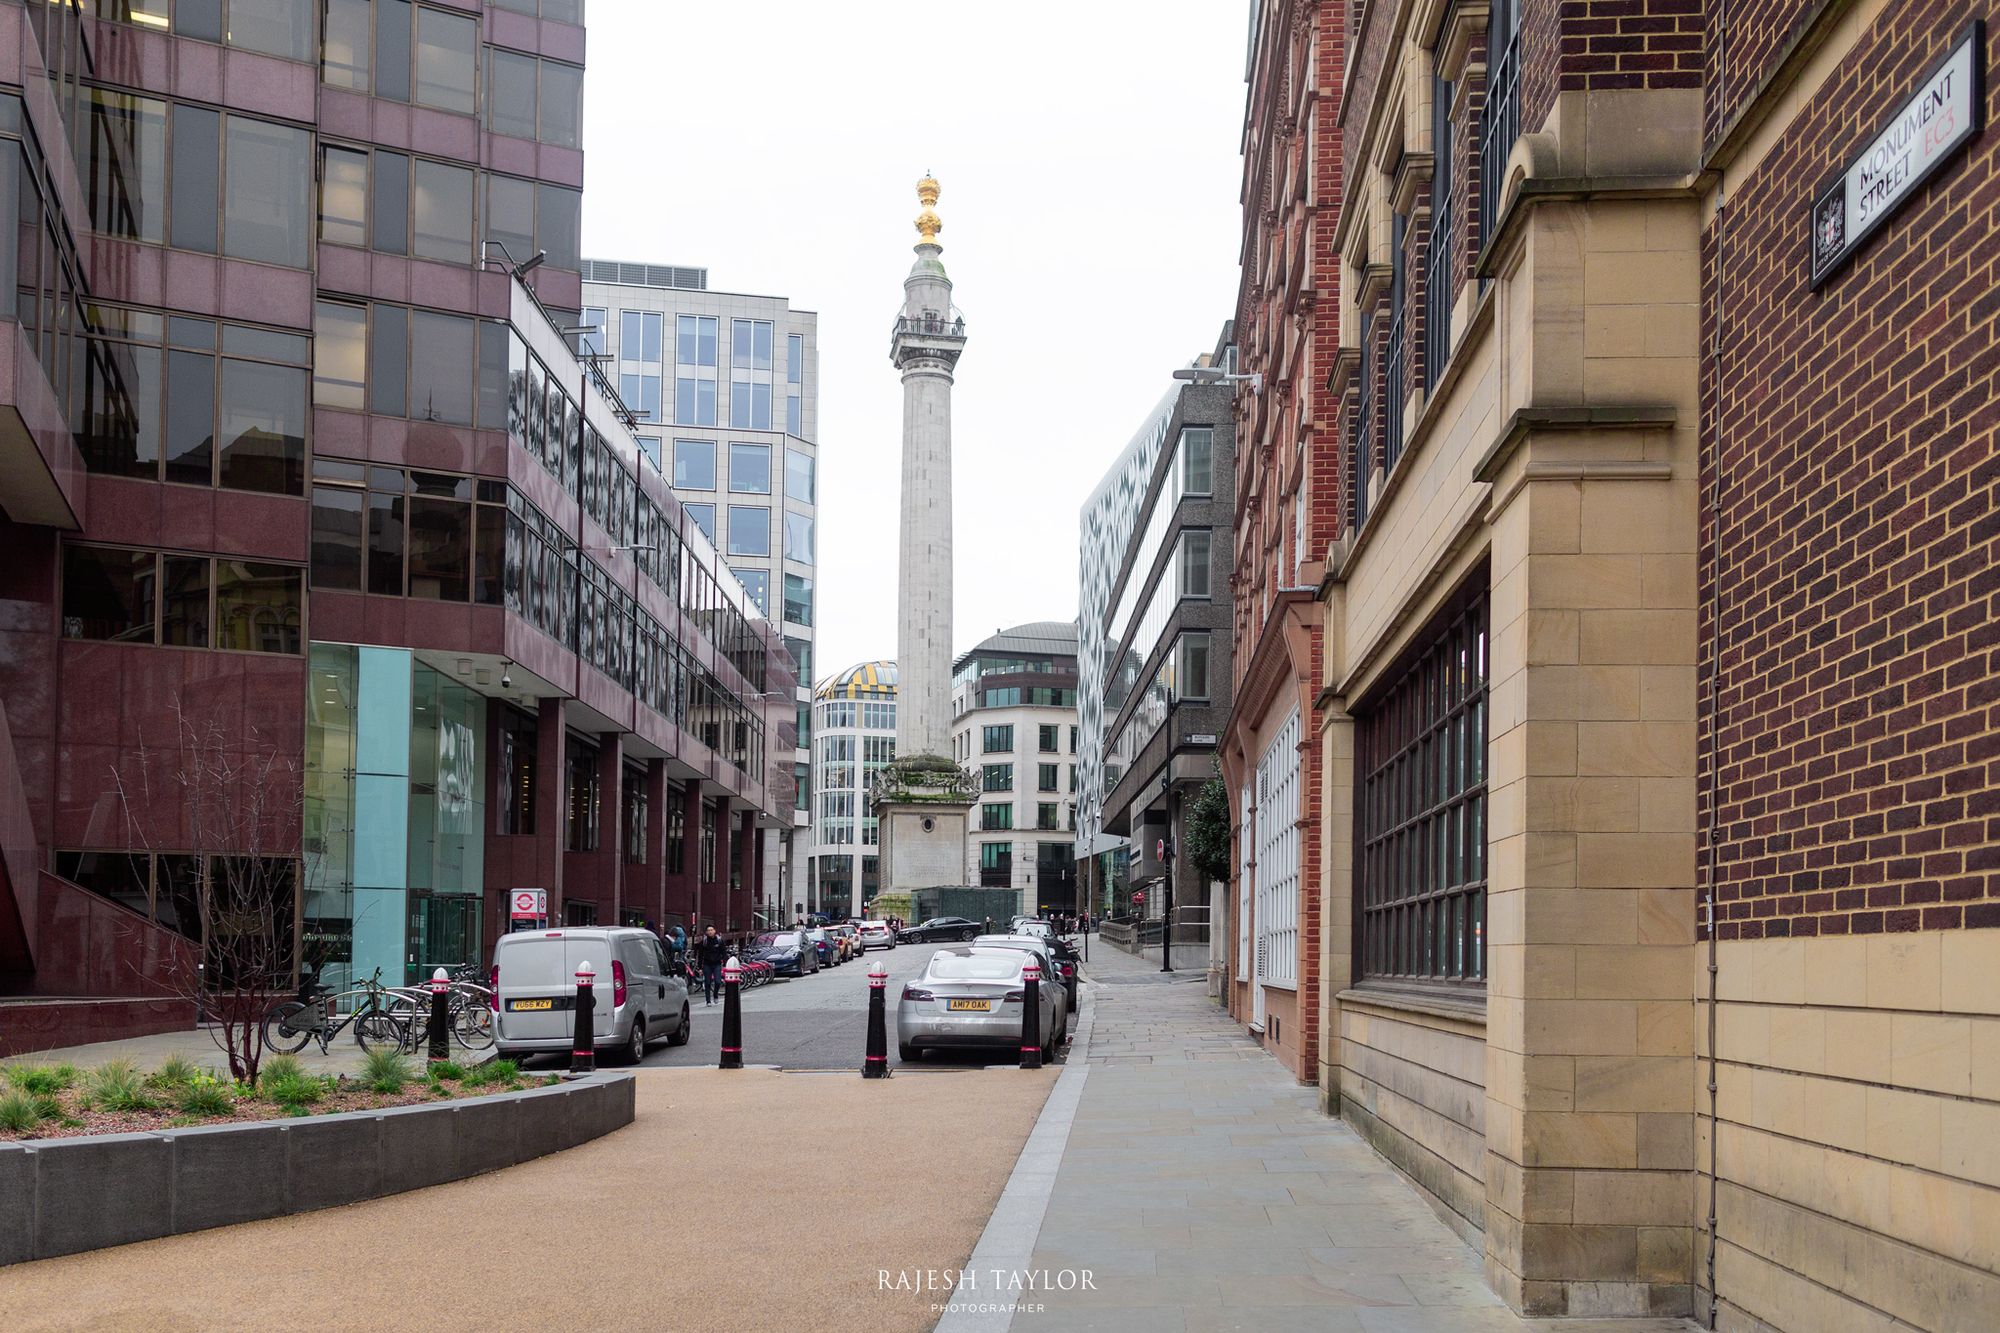 Monument Street towards The Monument to the Great Fire of 1666. © Rajesh Taylor